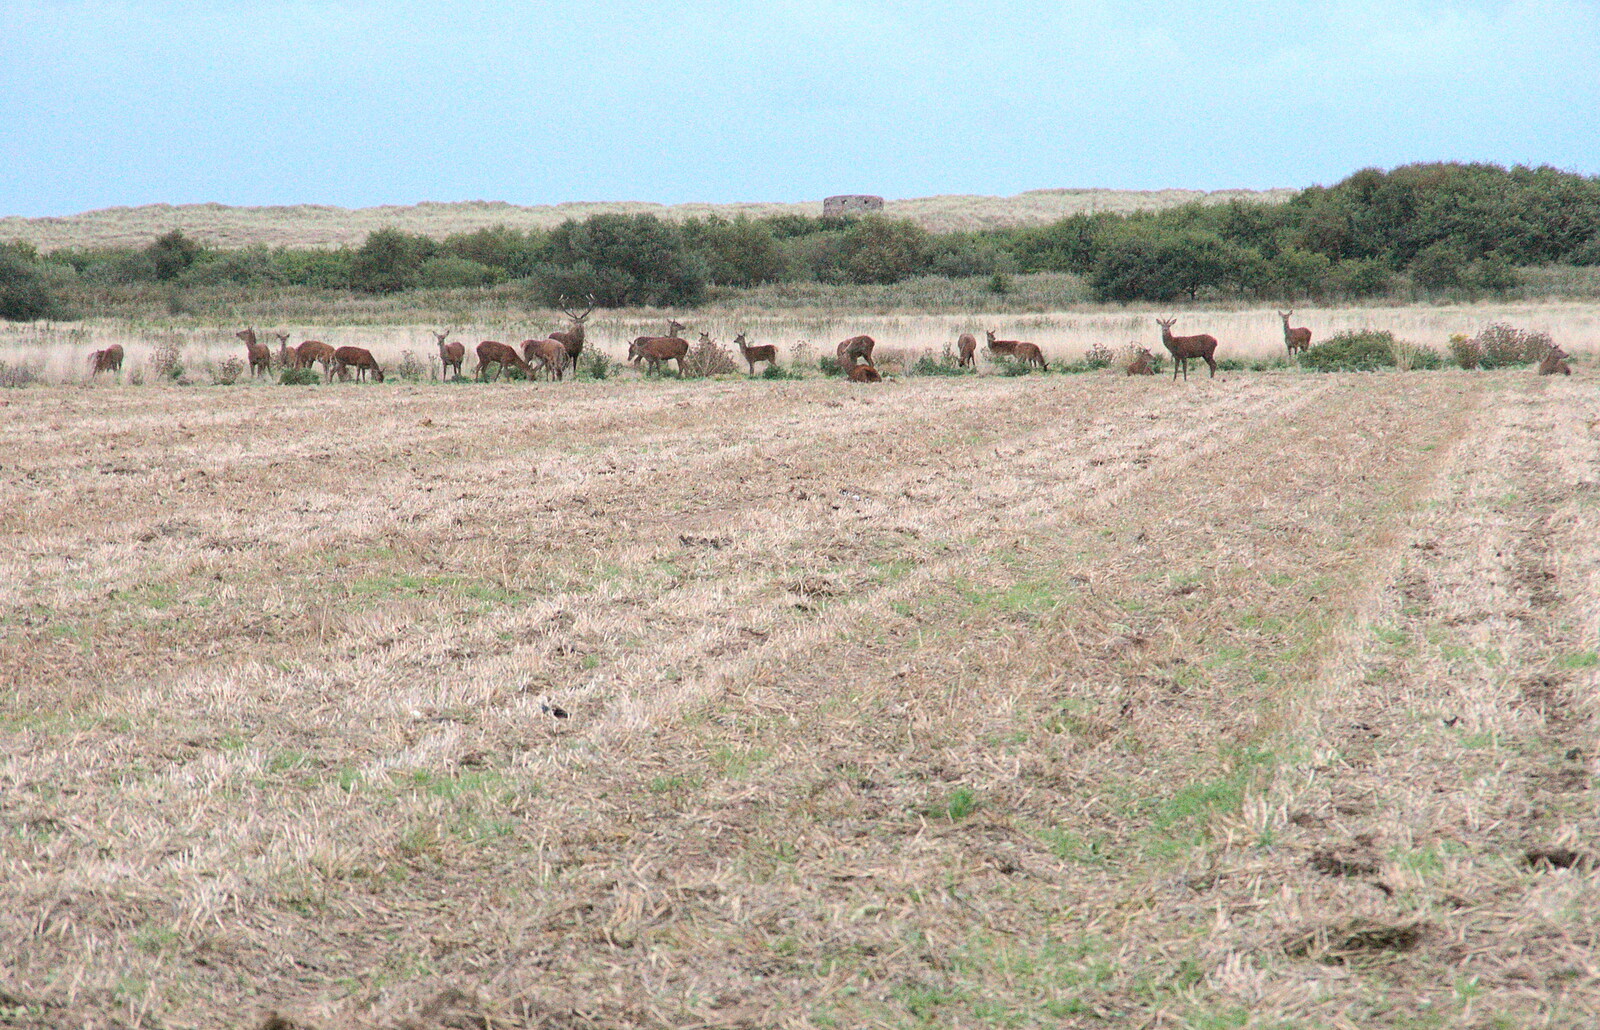 There's a herd of deer in a field at Horsey Gap from An Optimistic Camping Weekend, Waxham Sands, Norfolk - 22nd September 2018